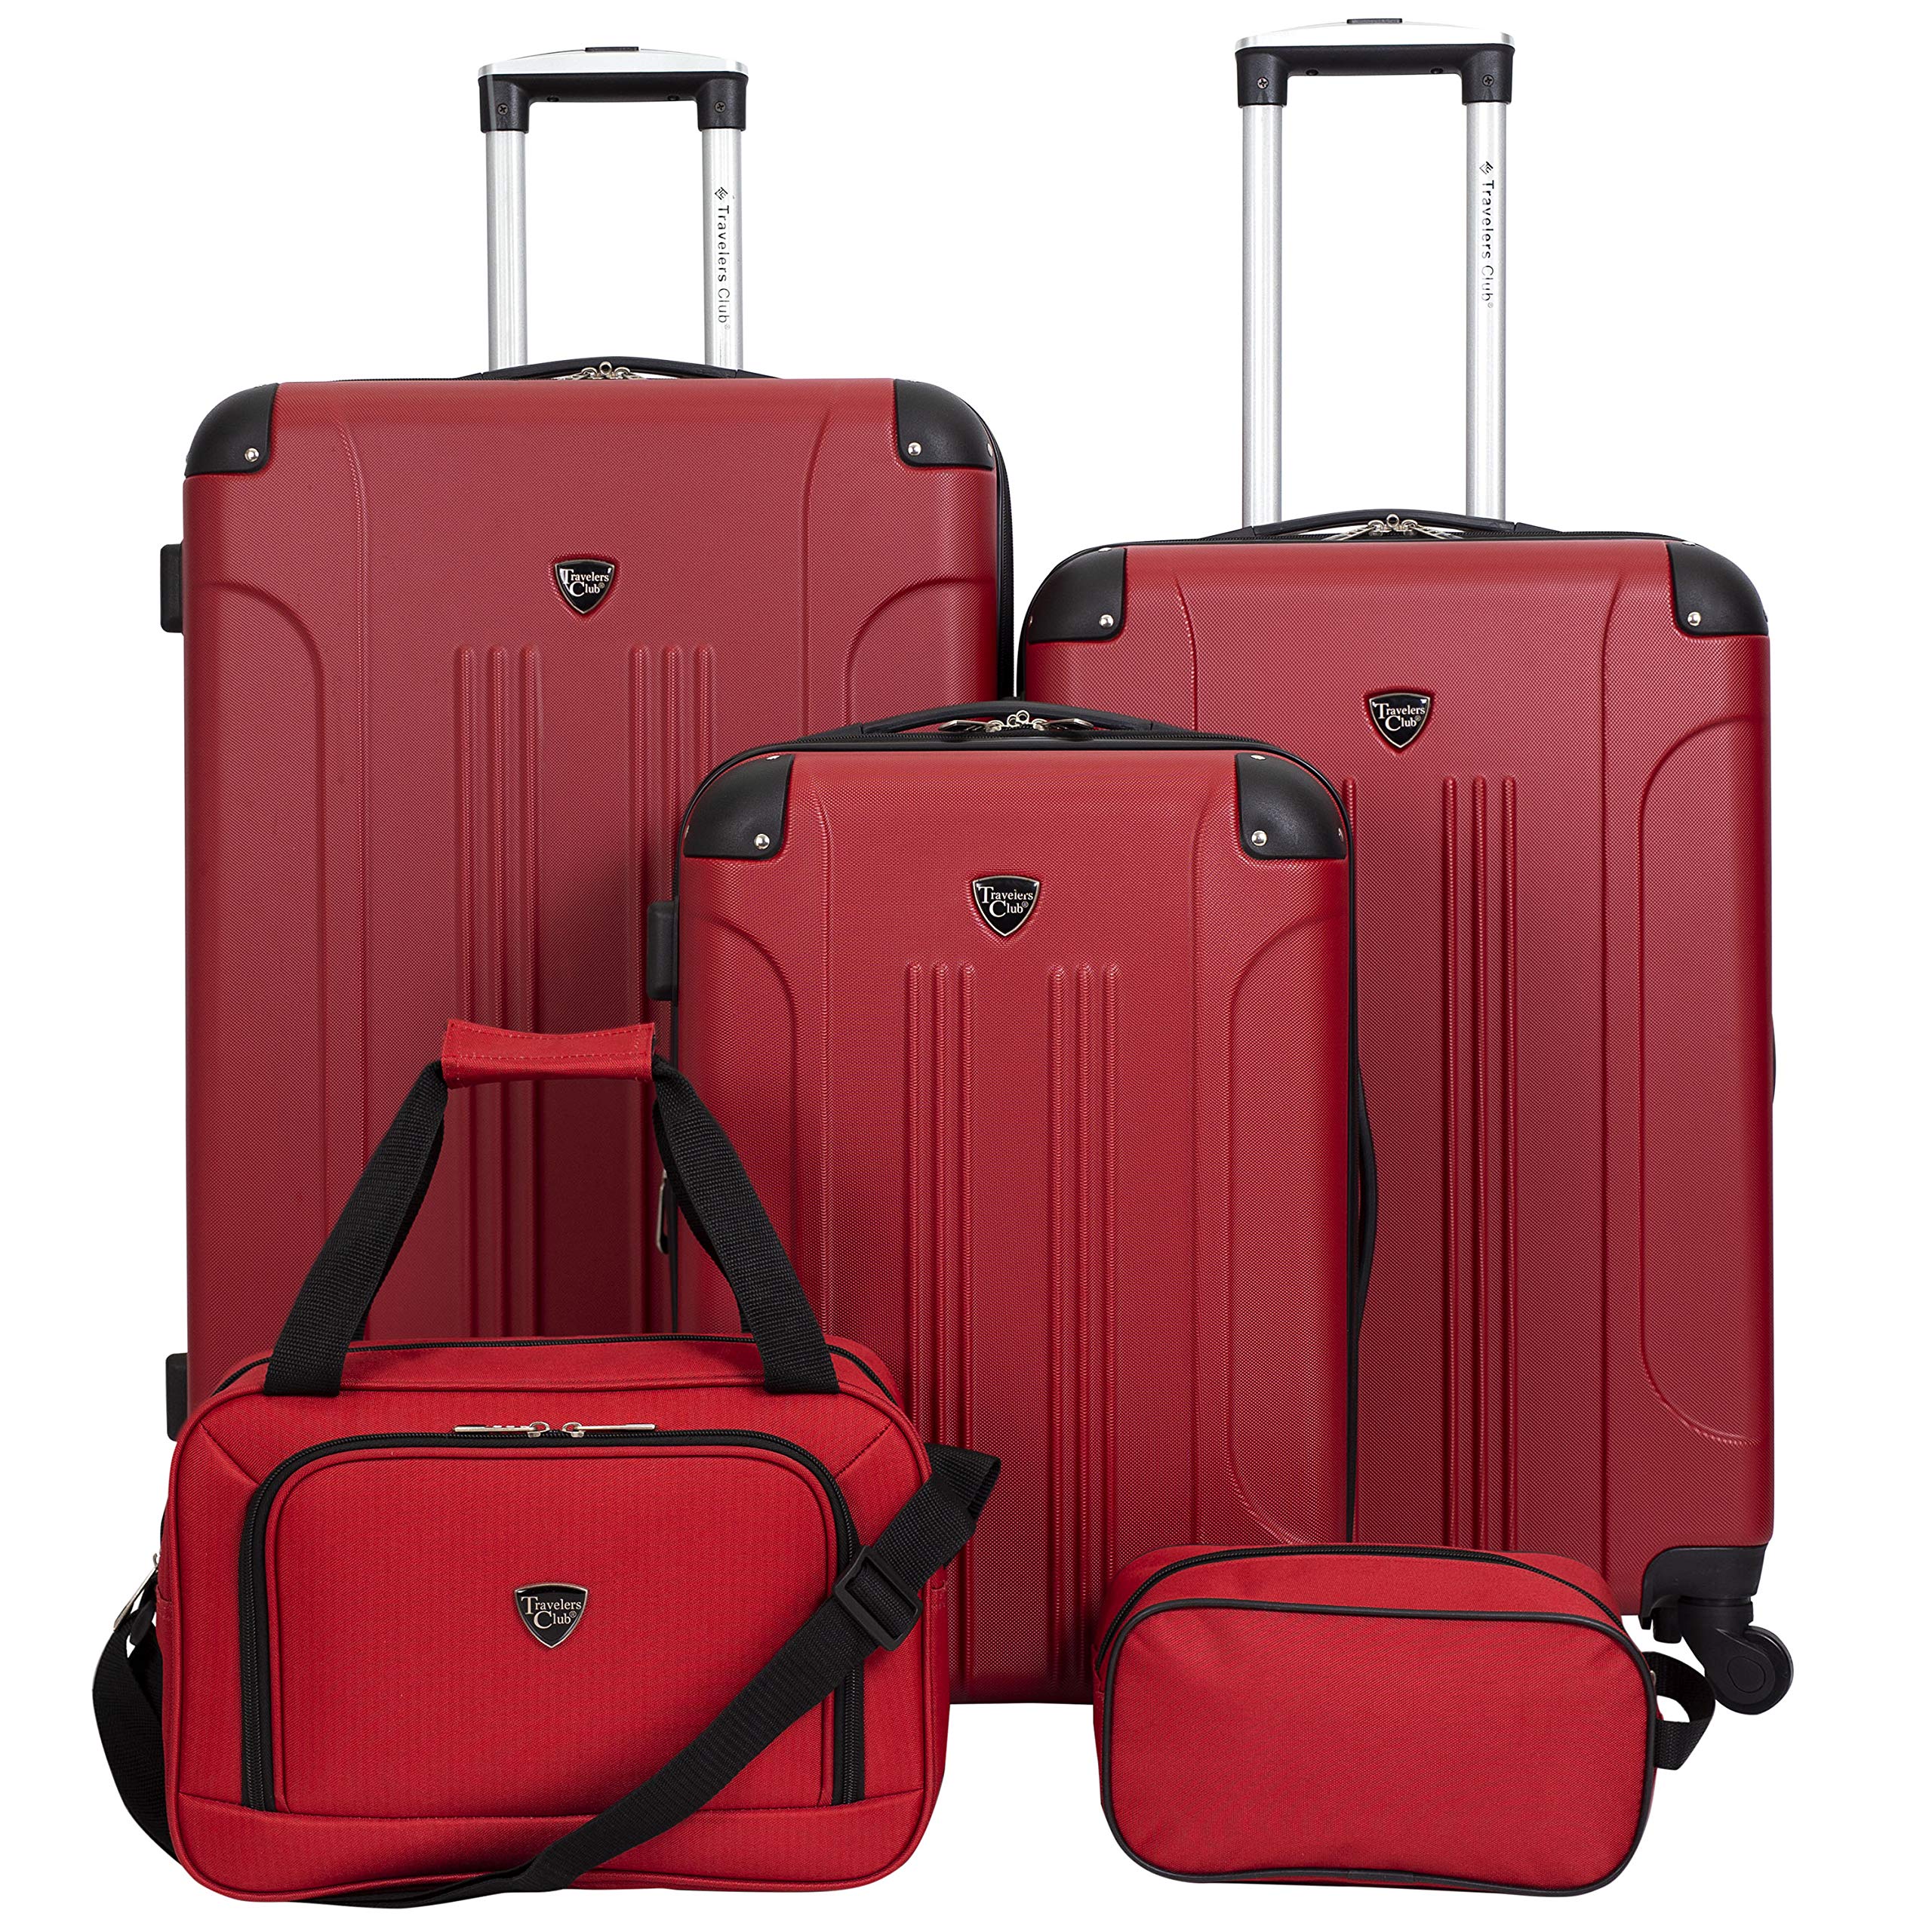 Travelers Club Chicago Hardside Expandable Spinner Luggage, Red, 5 Piece Set